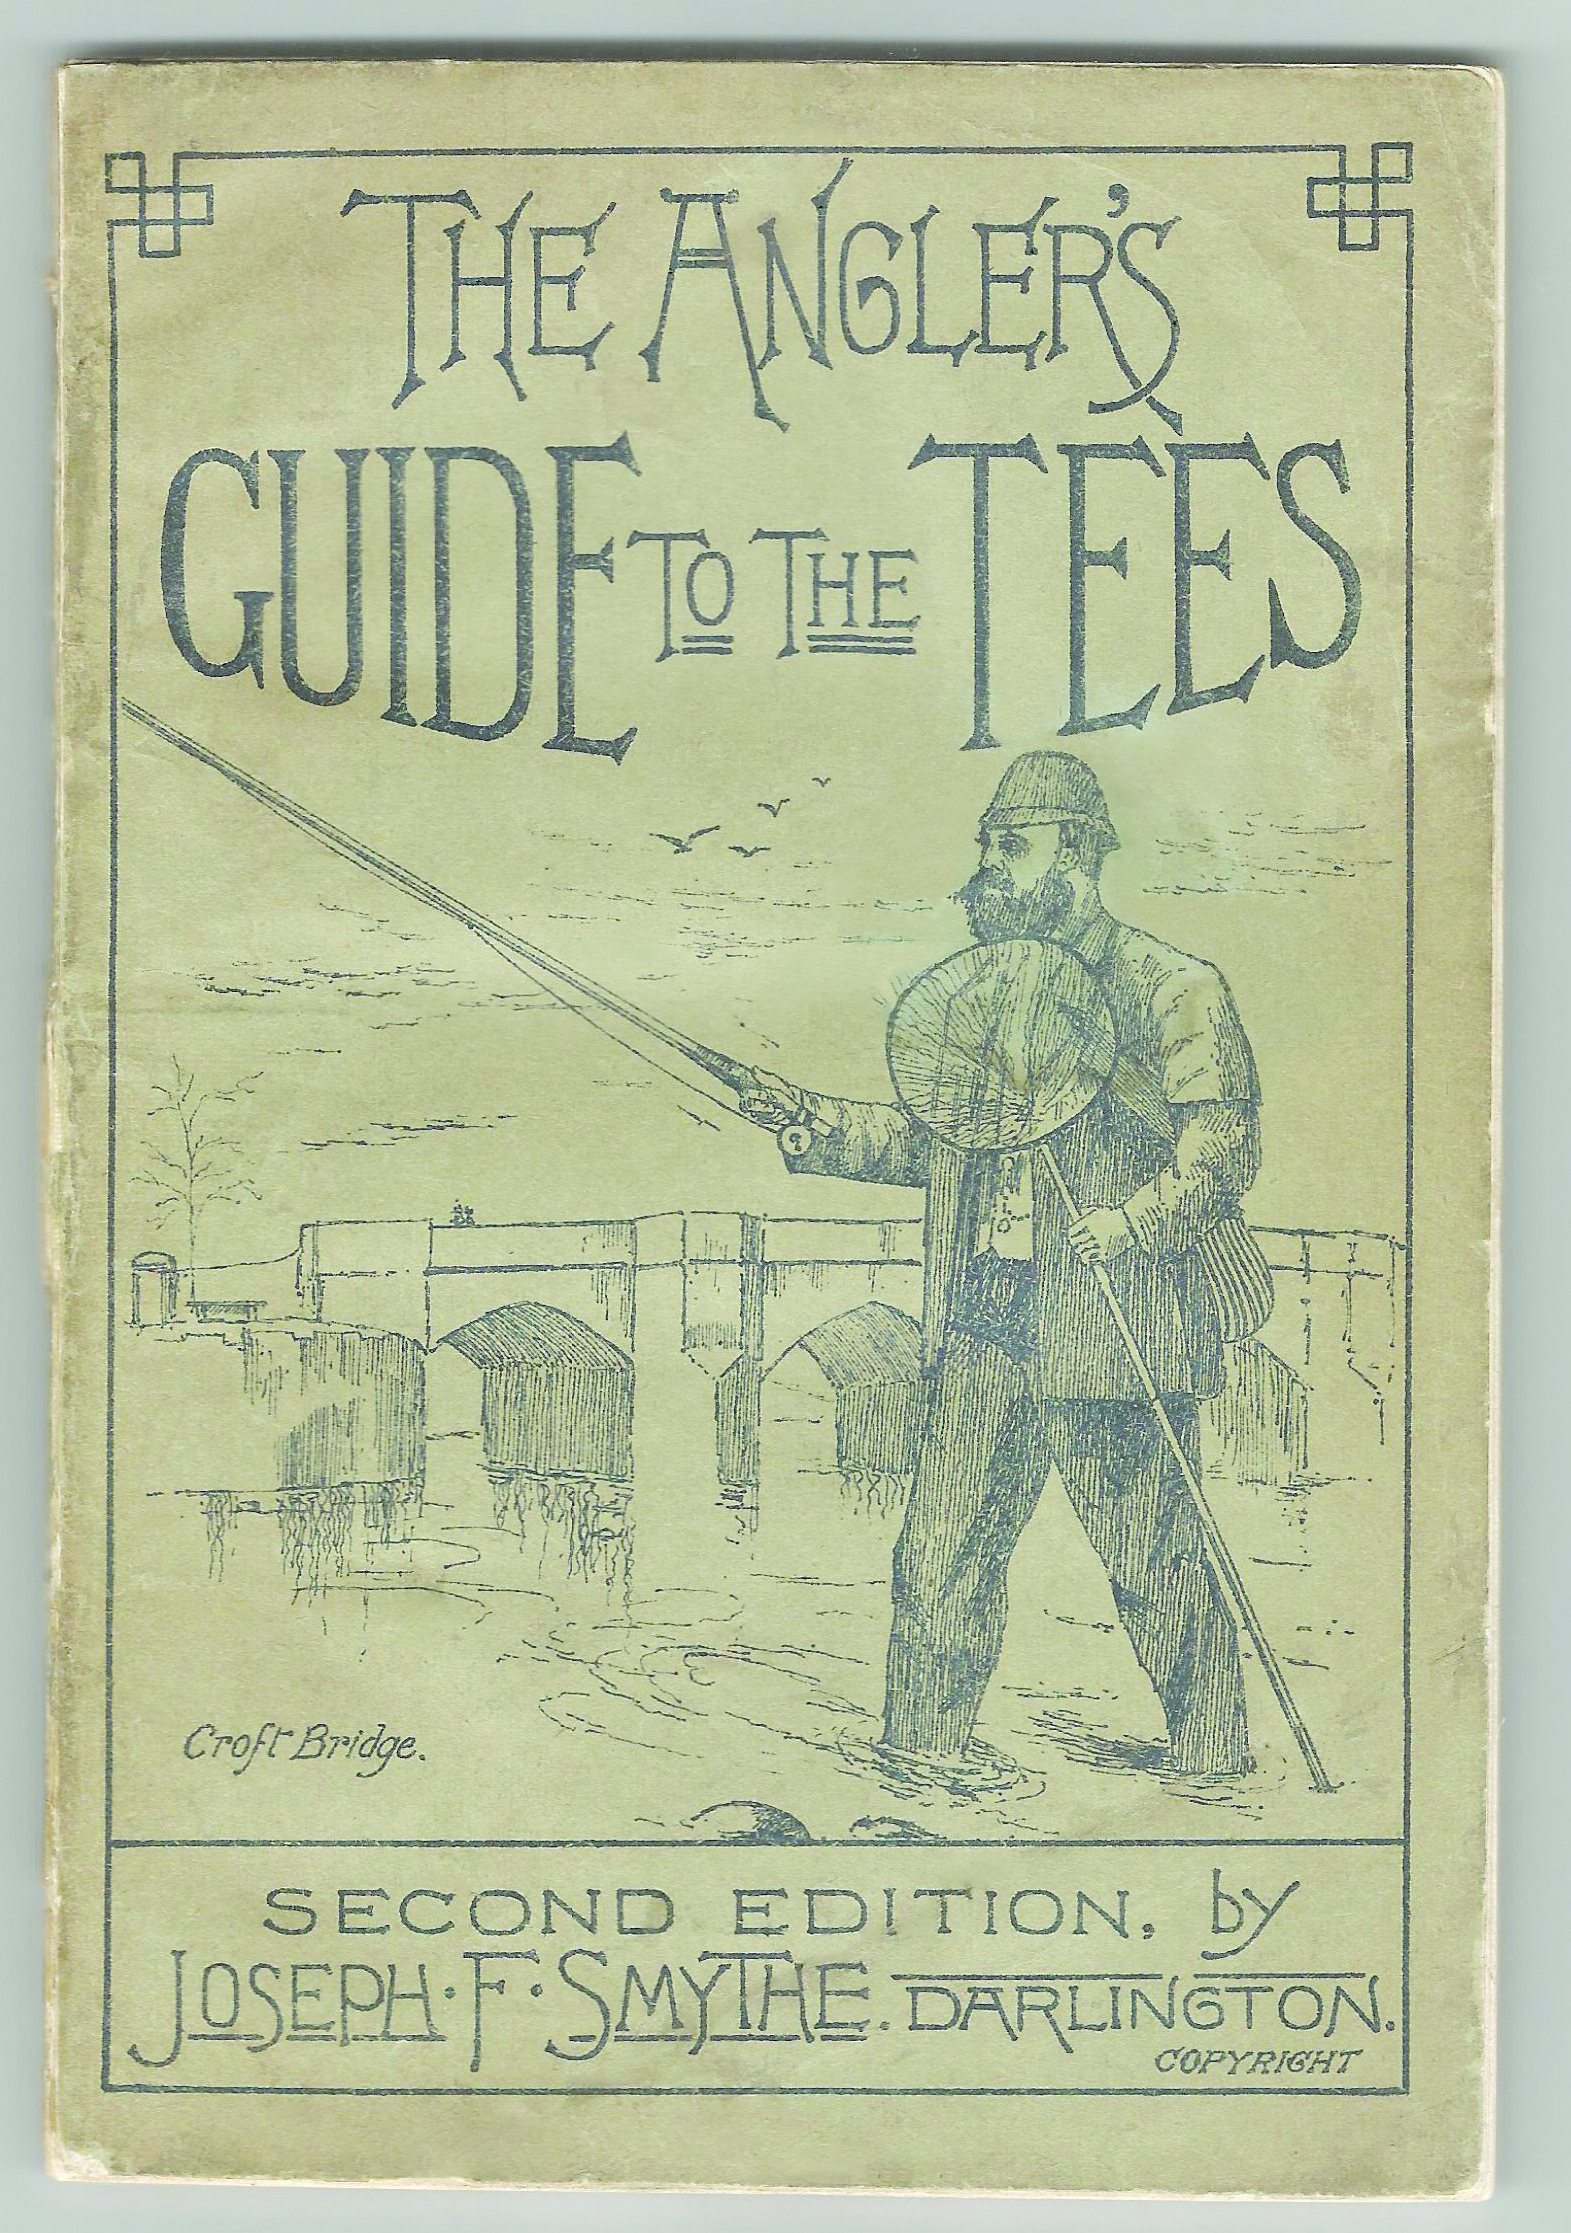 An anglers guide to the Tees by Joseph Forestall Smythe, of Darlington. Mr Smythe had a large fishing tackle and gunsmiths shop in Blackwellgate. In October 1894, his cartridge loading room exploded, killing his apprentice, and doing much damage